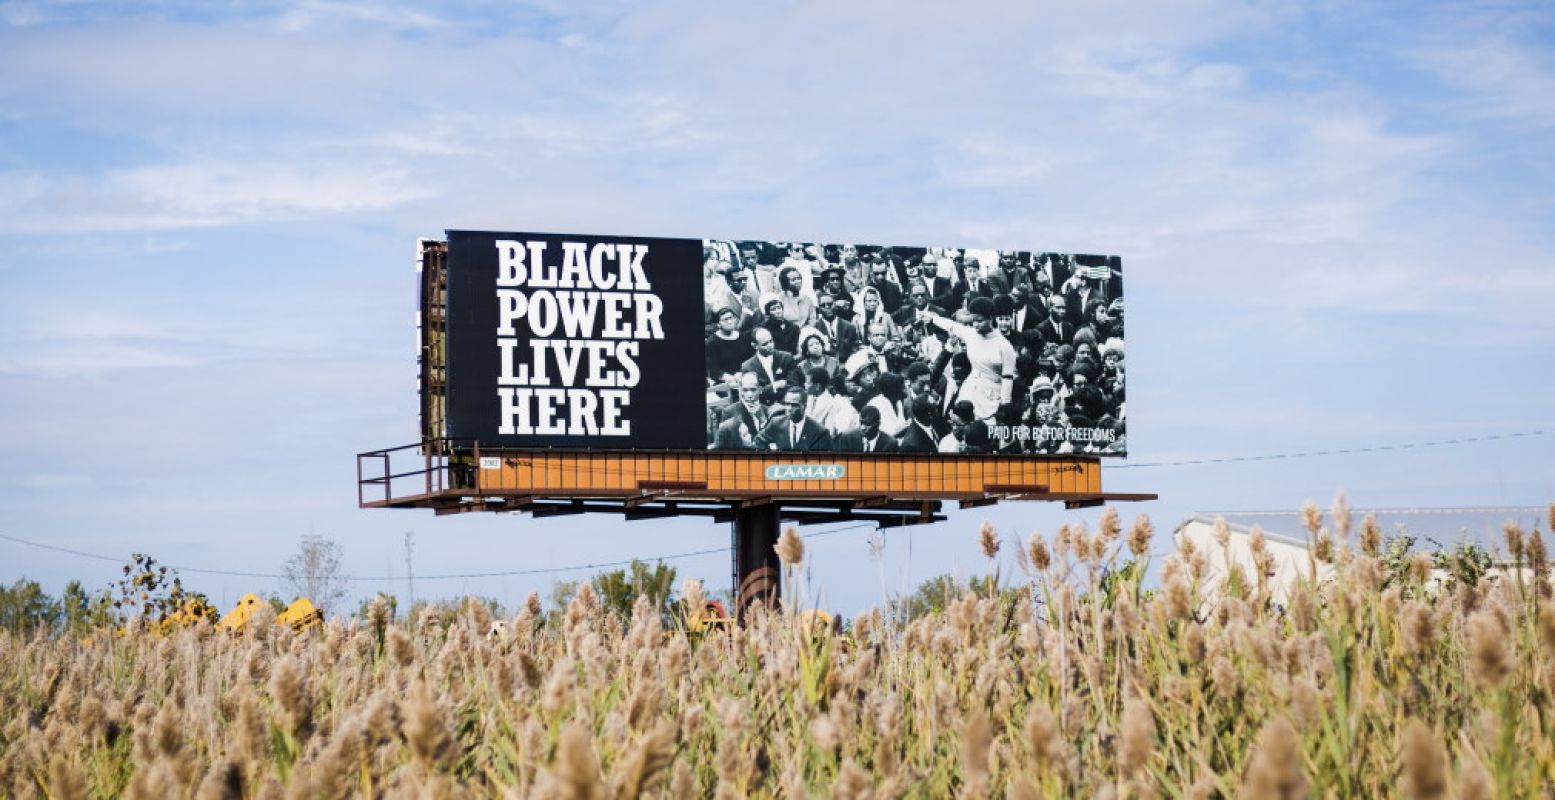 Theaster Gates, 'Where Black Power Lives', Gary, IN, For Freedoms' 50 State Initiative, 2018. Foto: Madeleine Thomas